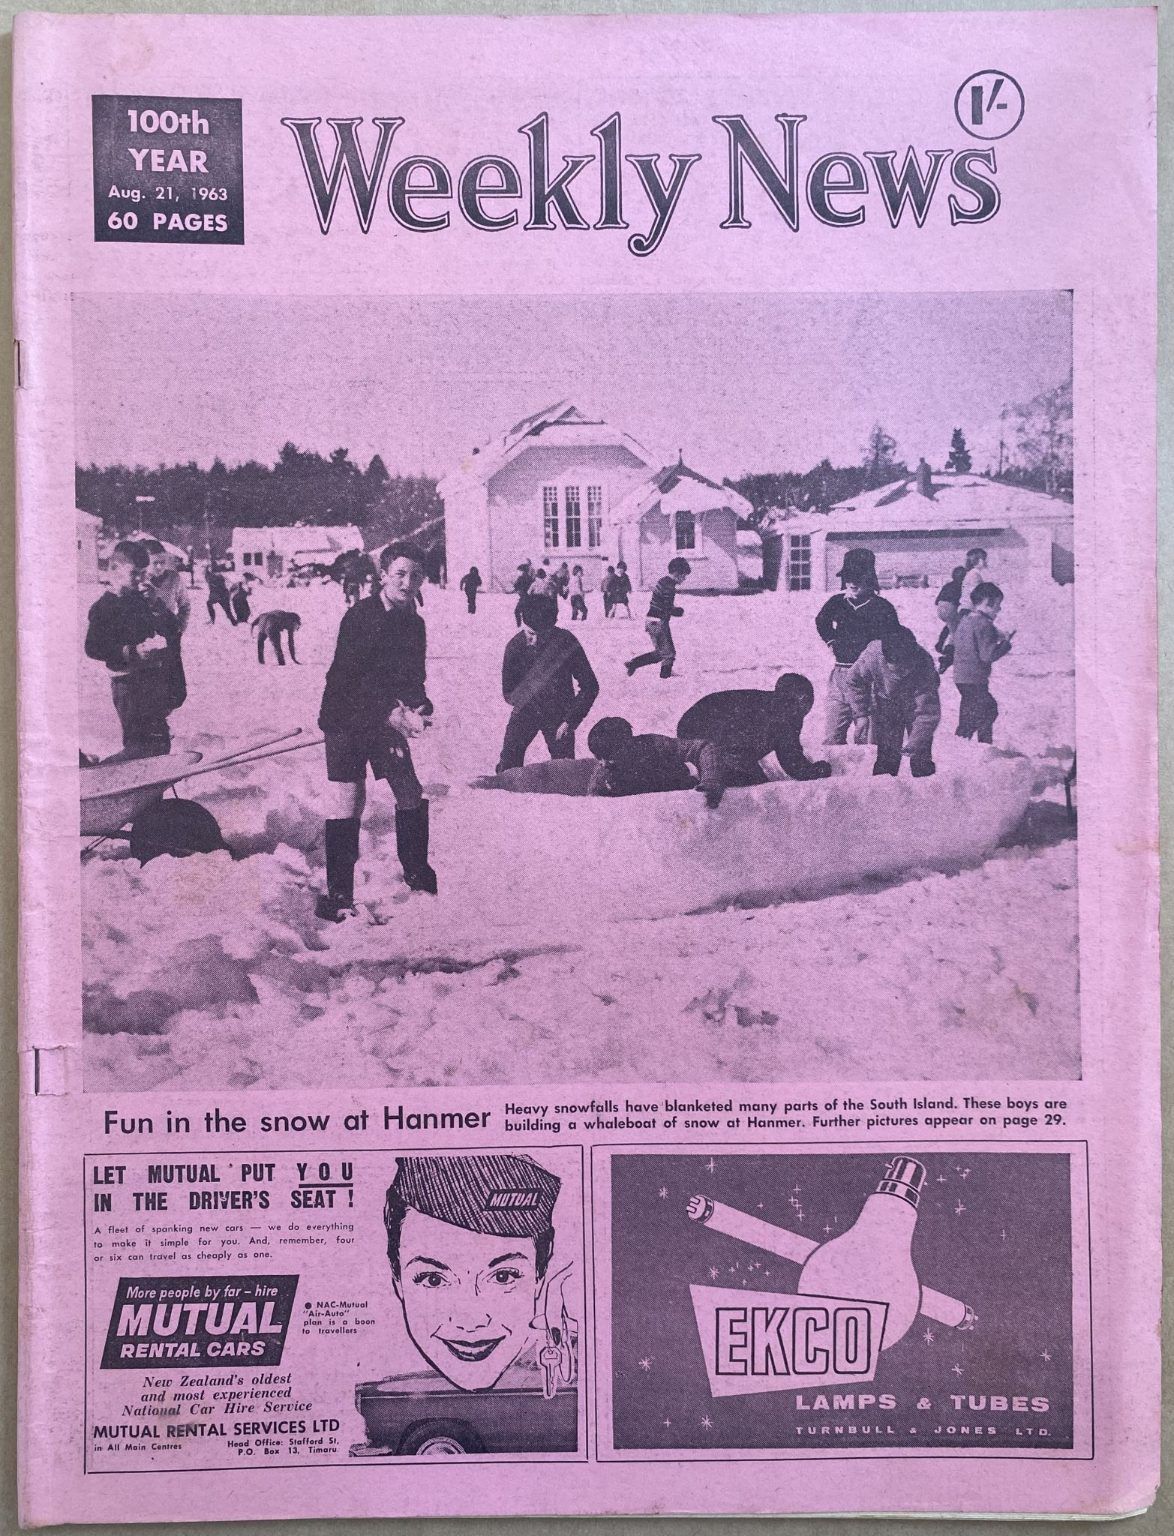 OLD NEWSPAPER: The Weekly News, No. 5204, 21 August 1963